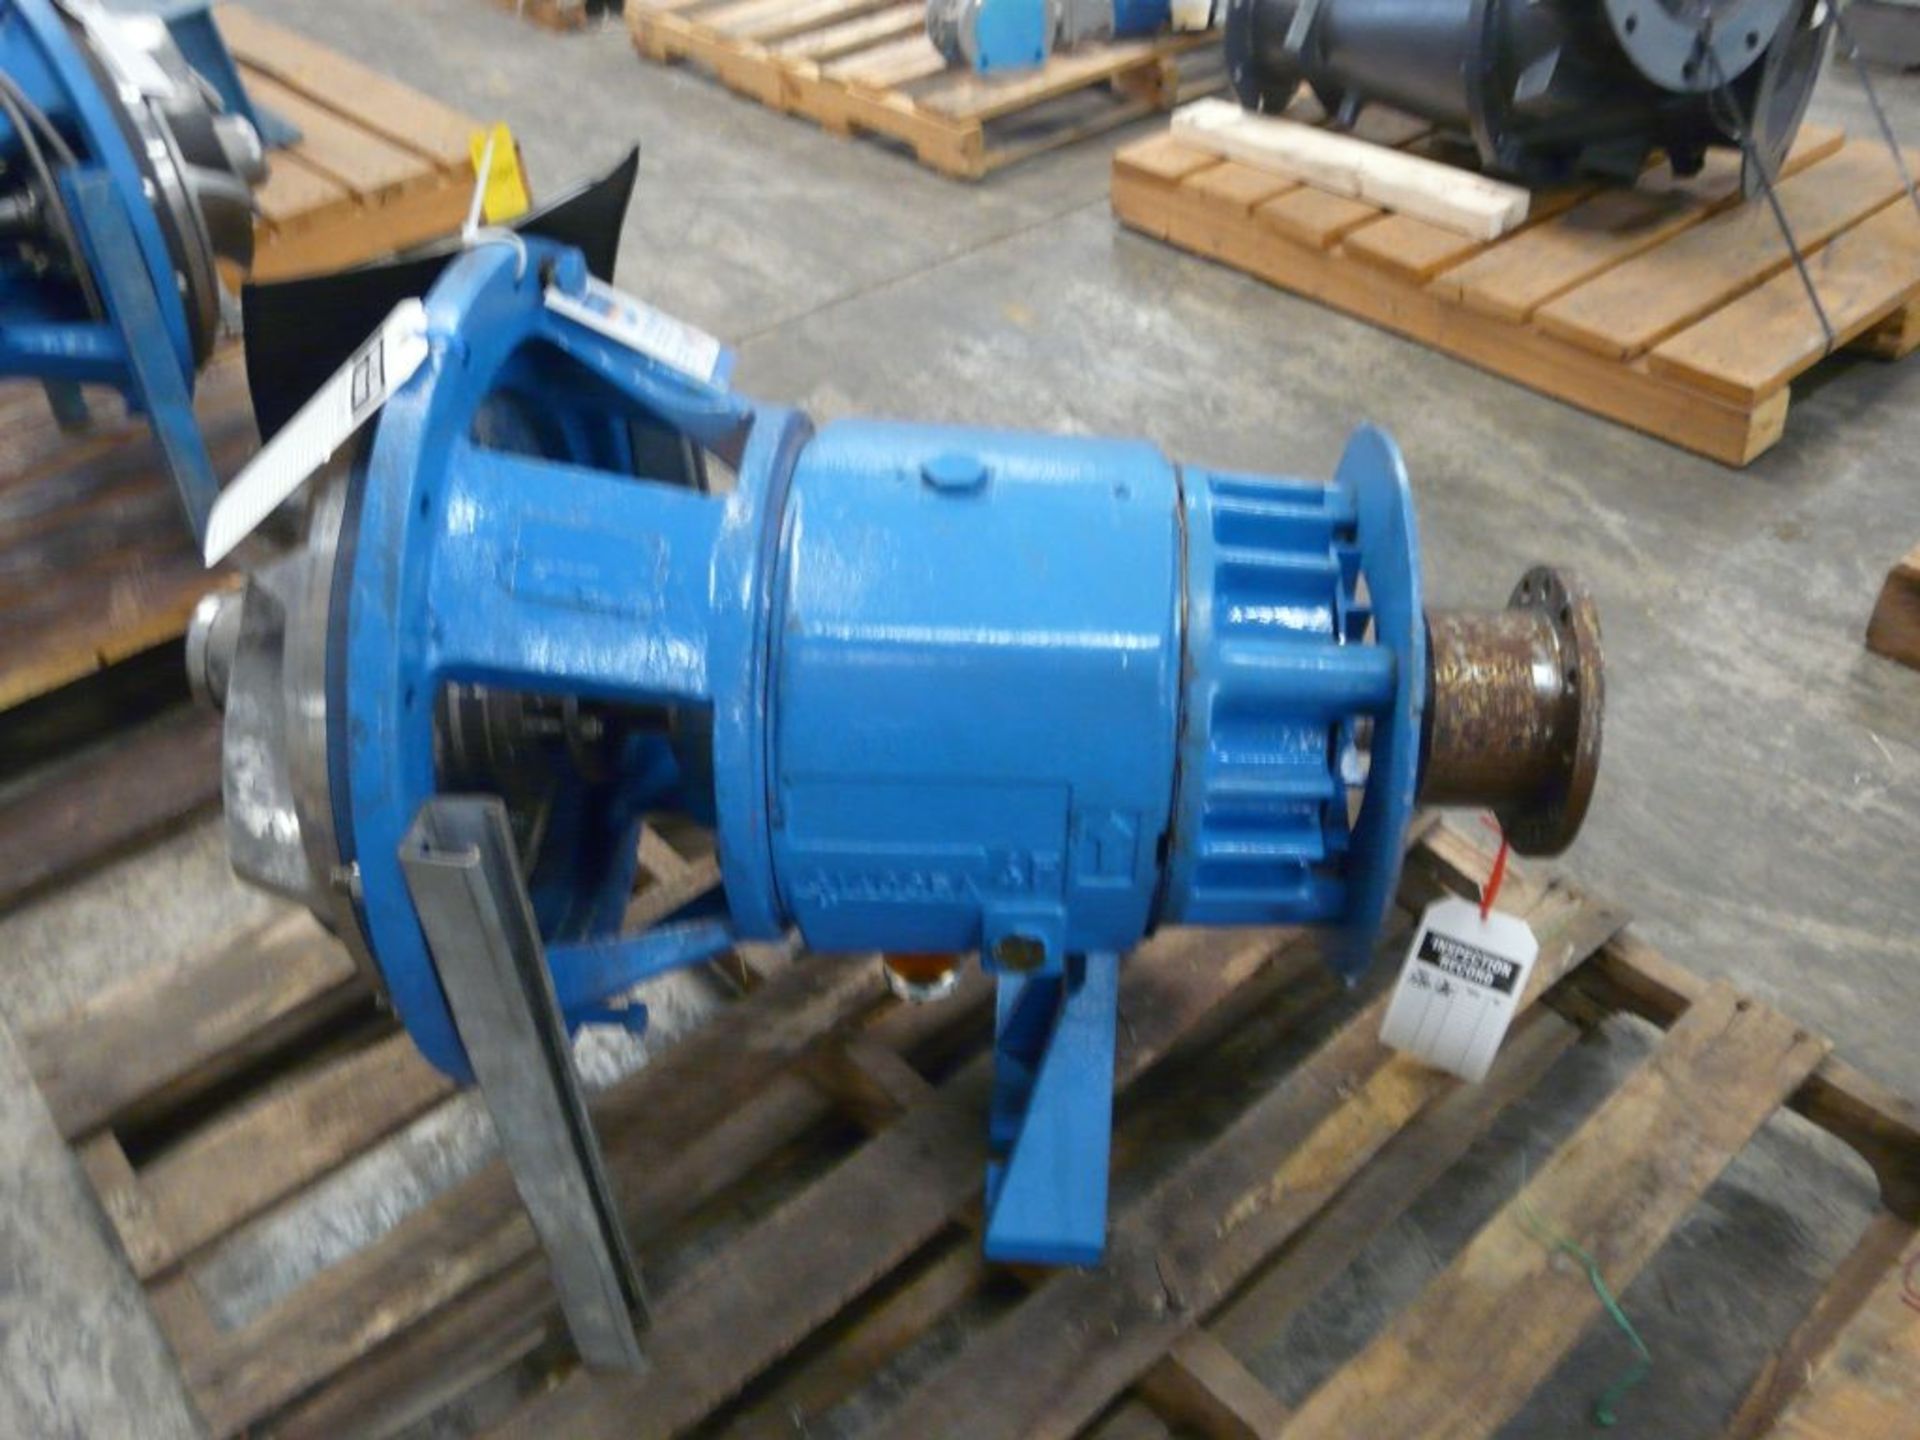 ABS Pullout Pump Subassembly - BA8X6X17; Tag: 215762 - Image 4 of 5